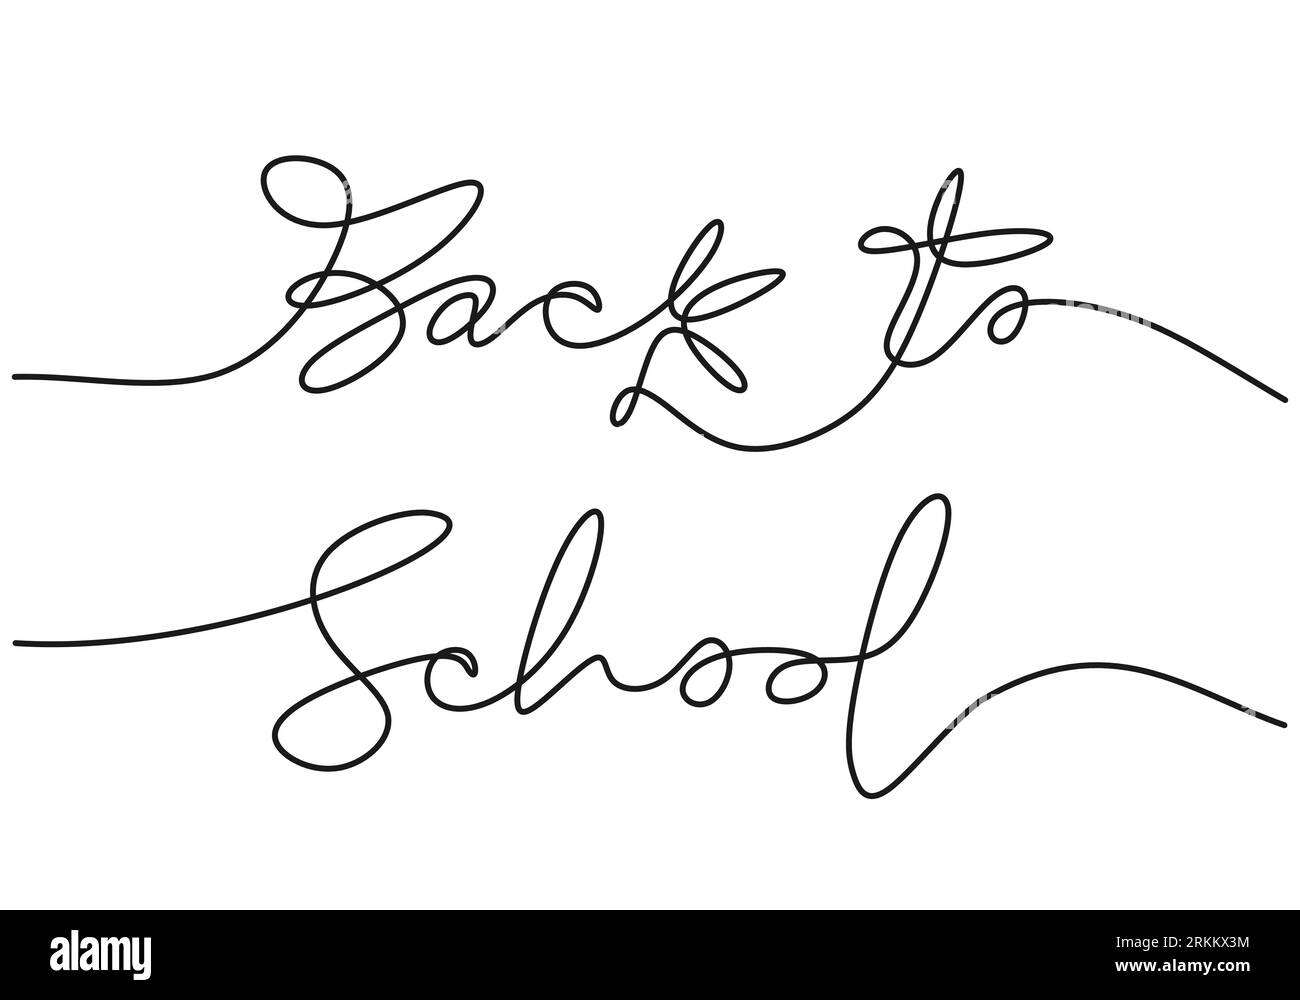 Continuous one line drawing of back to school handwritten words isolated on white background. Stock Vector